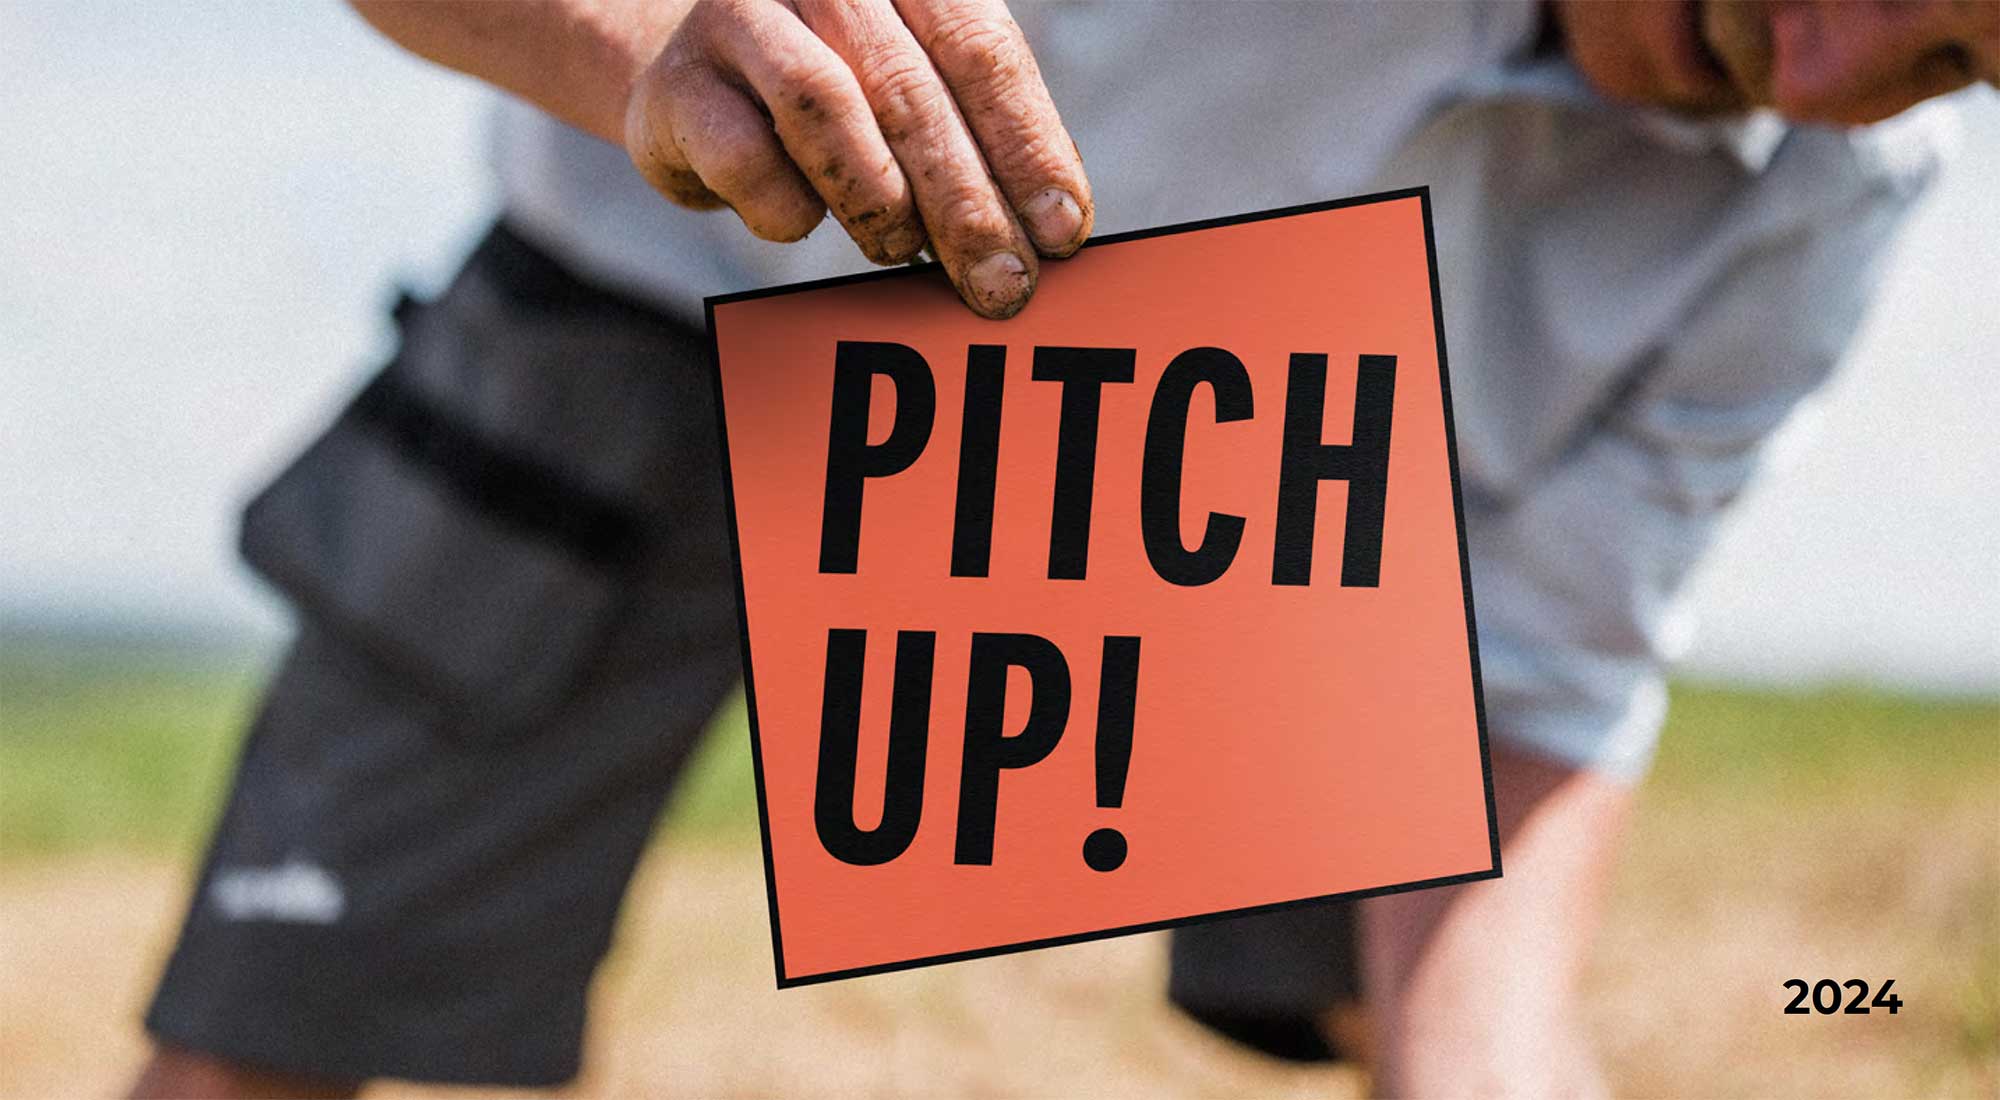 Pitch Up! 2024 image